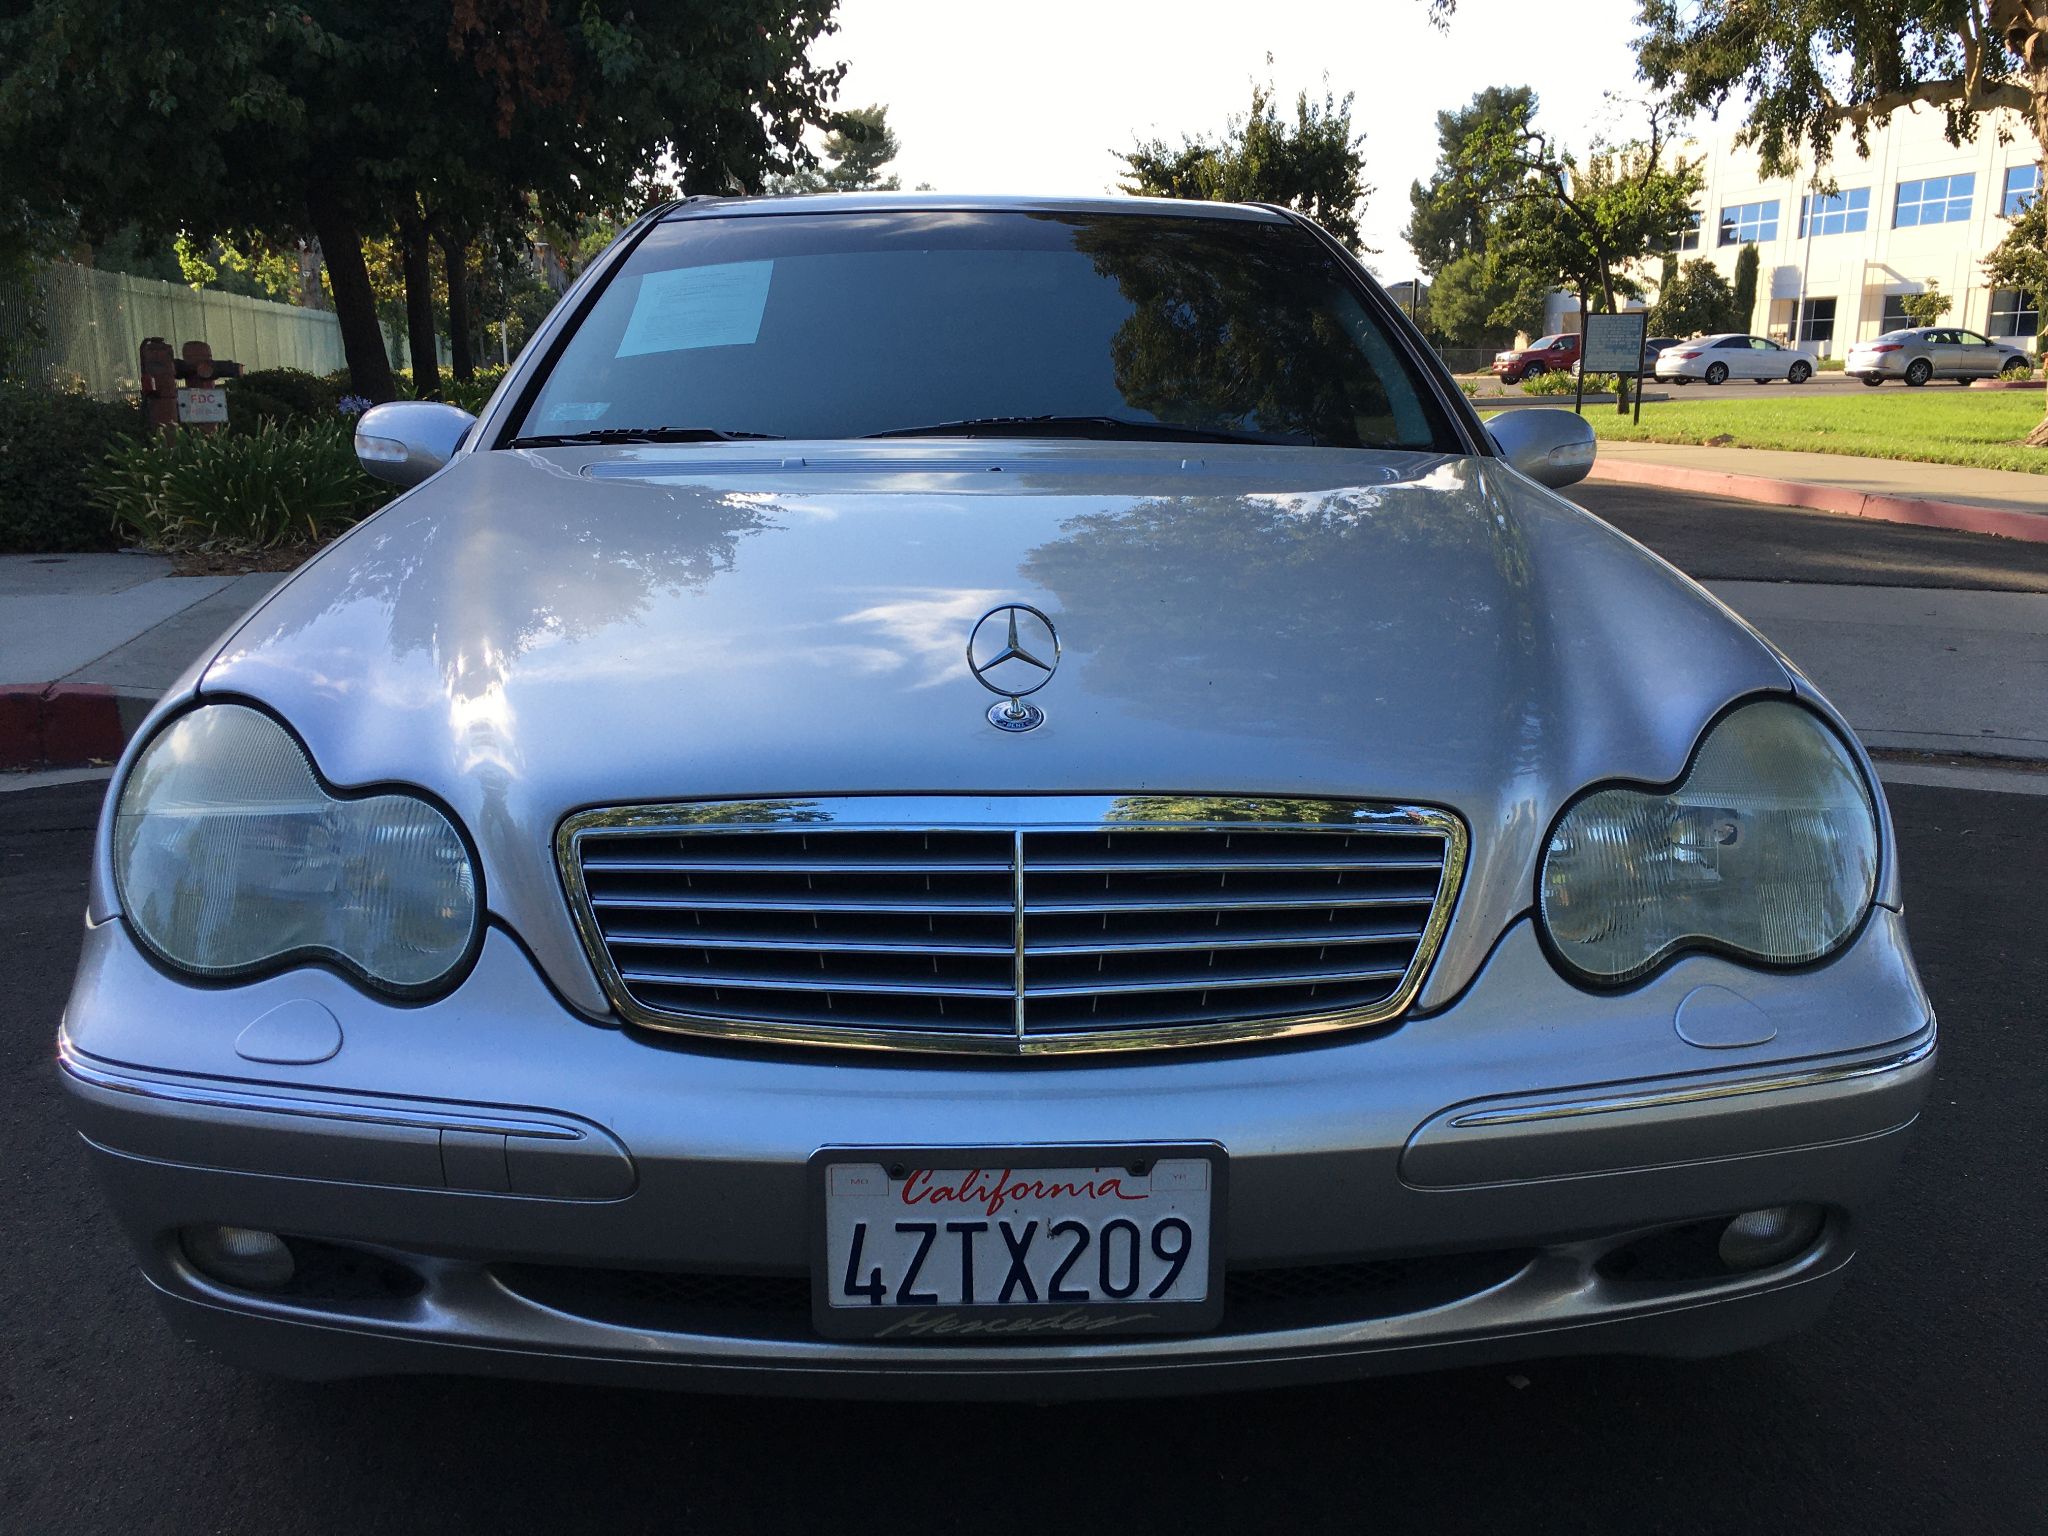 Used 2002 Mercedes-Benz C-Class C240 at City Cars ...